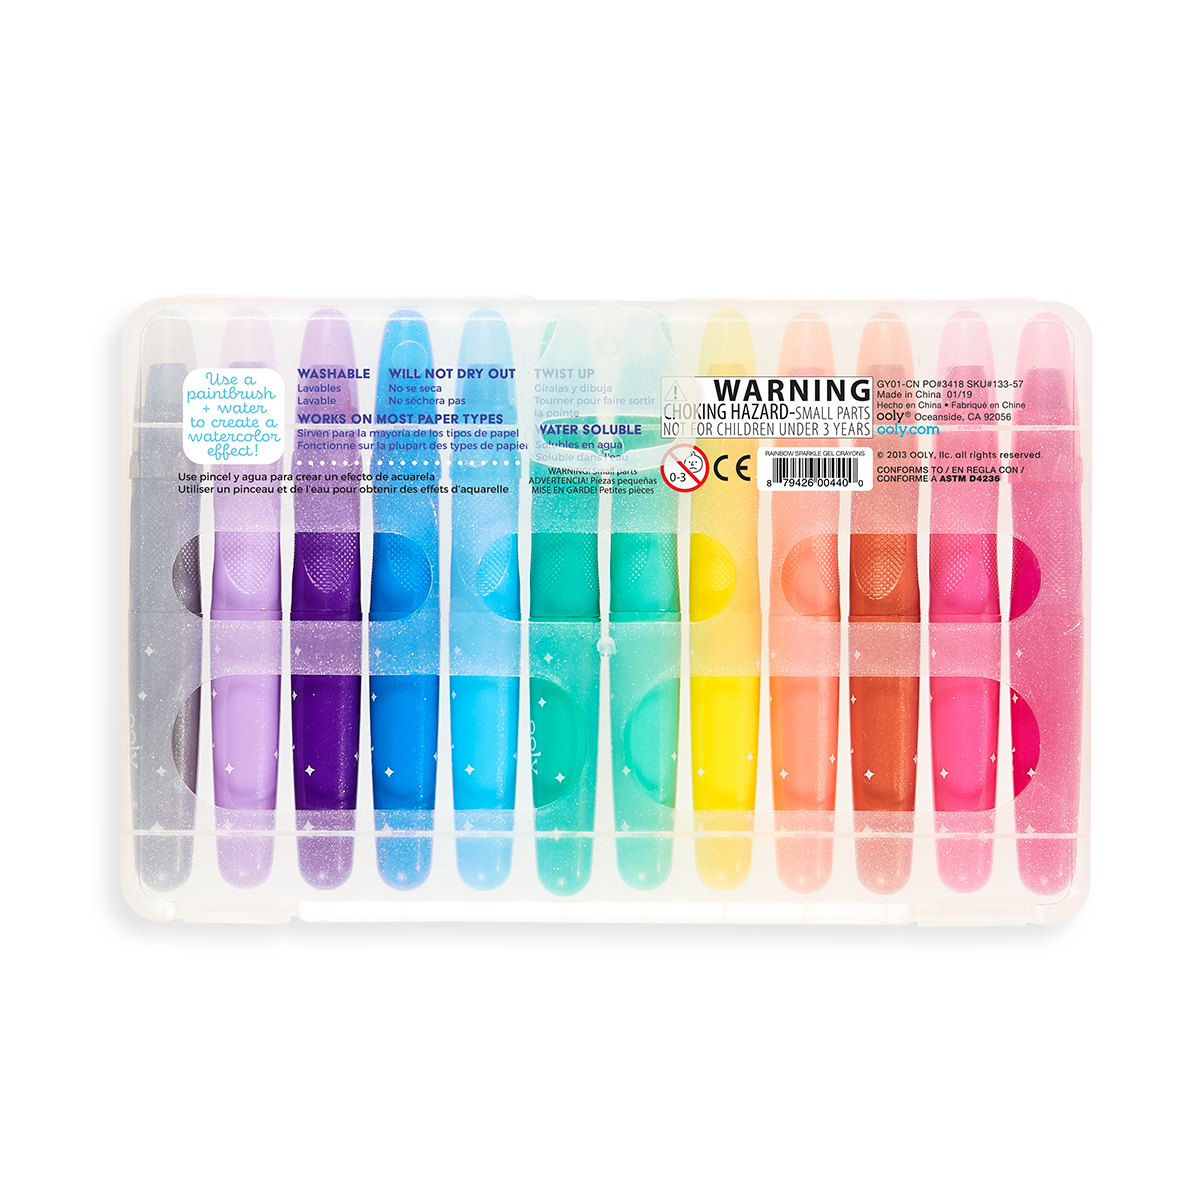 Back of the travel case packaging of the Rainbow Sparkle watercolor gel crayon set